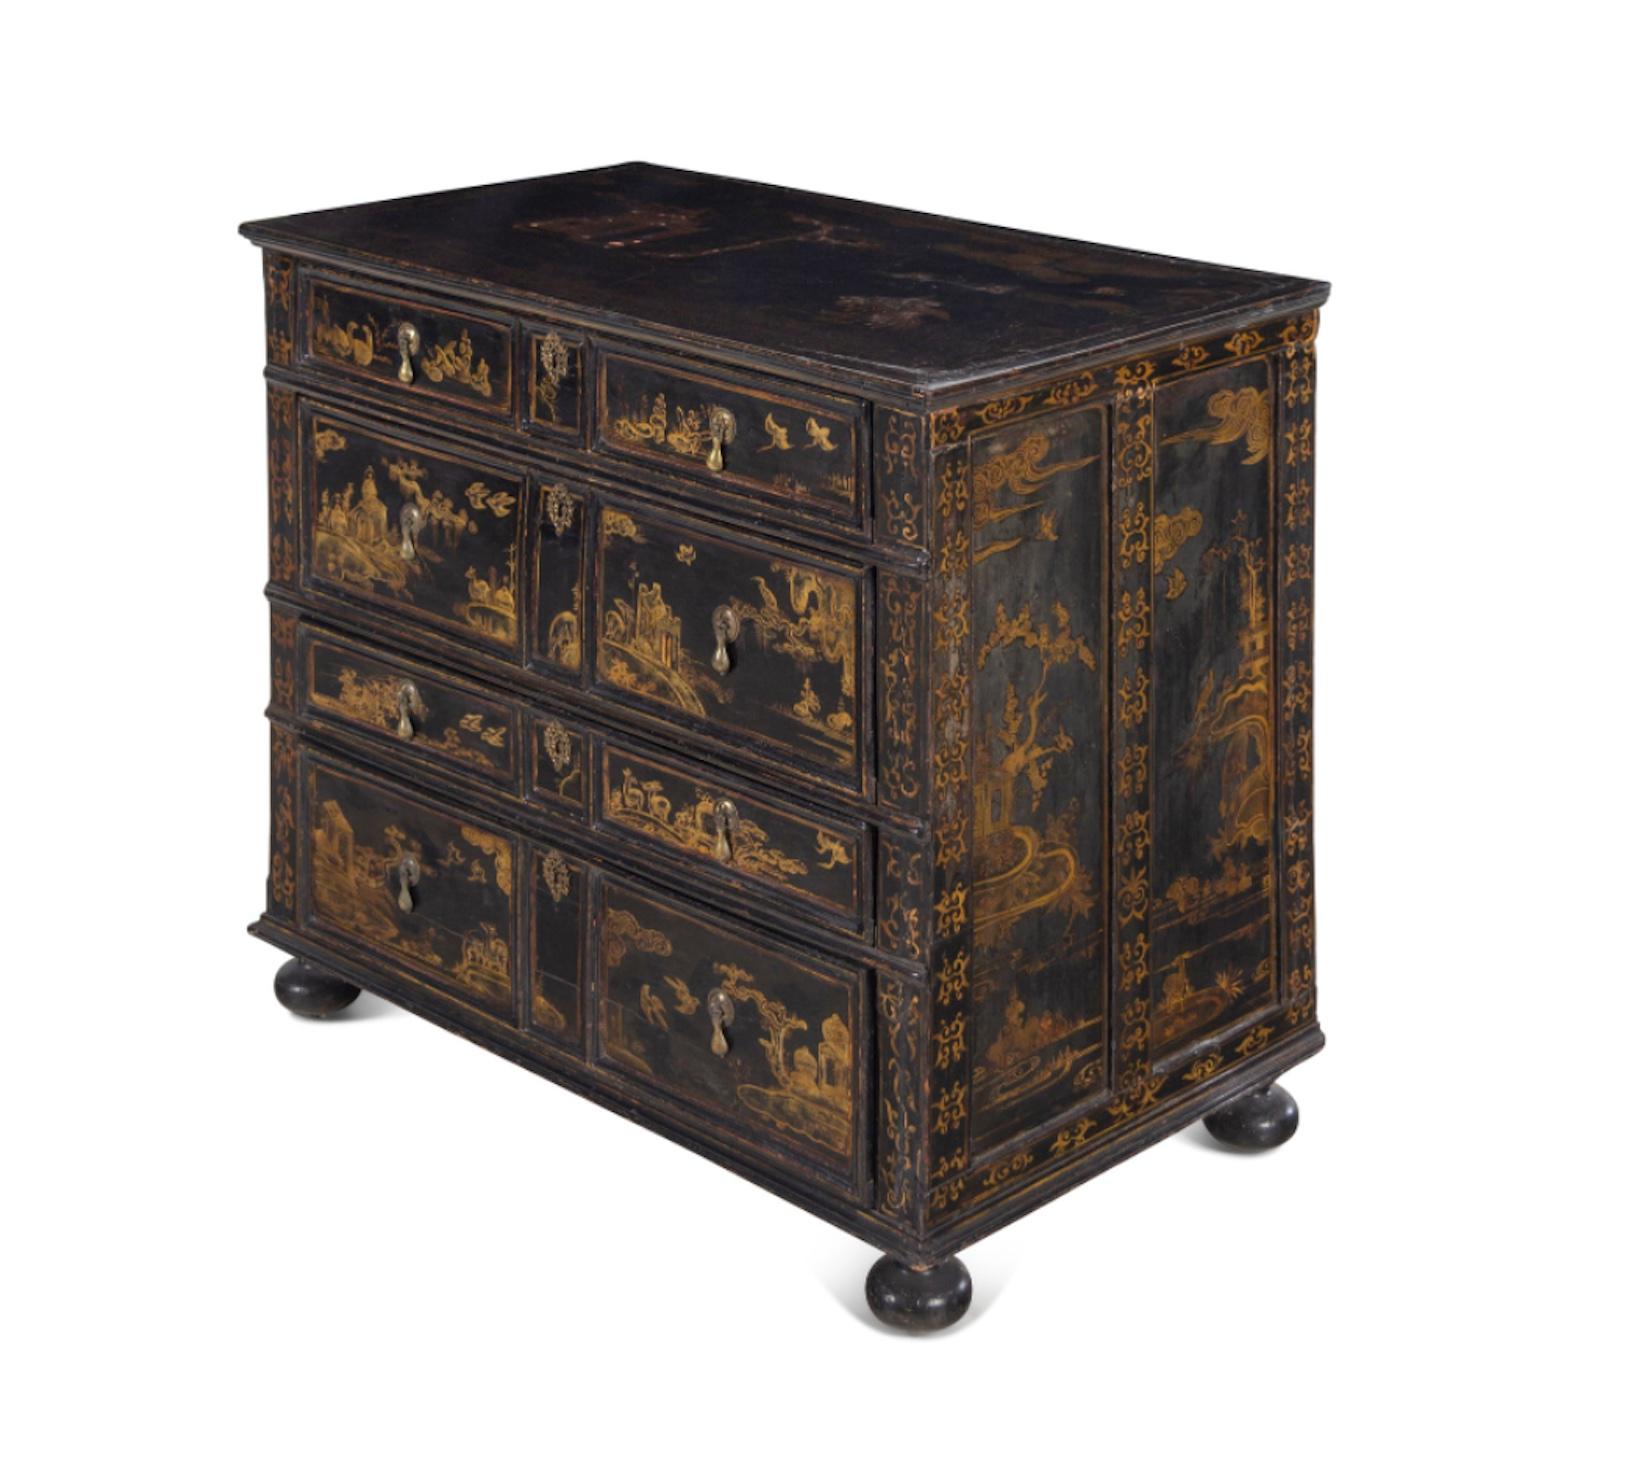 A George I/II Lacquered and Japanned chest of drawers
18th Century. An amazing chest that came out of a prominent Chicago estate.
Measures: Height 32 3/4 x width 37 1/4 x depth 20 3/4 inches.